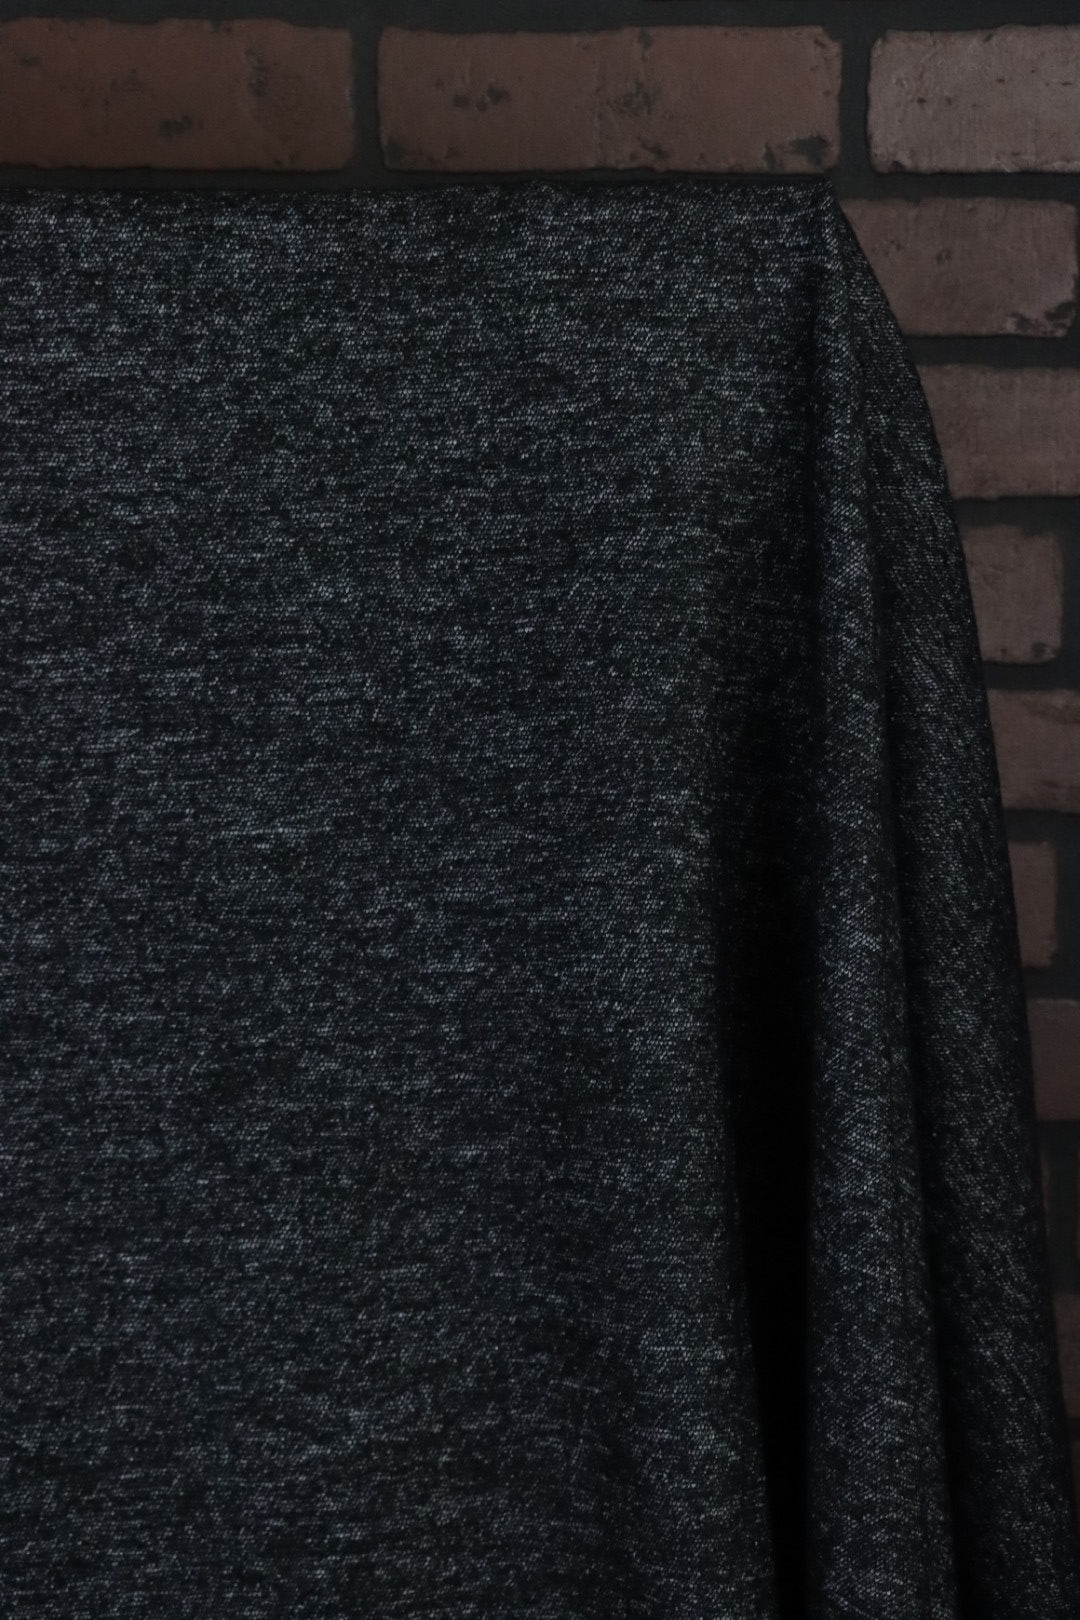 Black Cotton Fabric Jersey Knit by the Yard 200GSM Soft Hand 